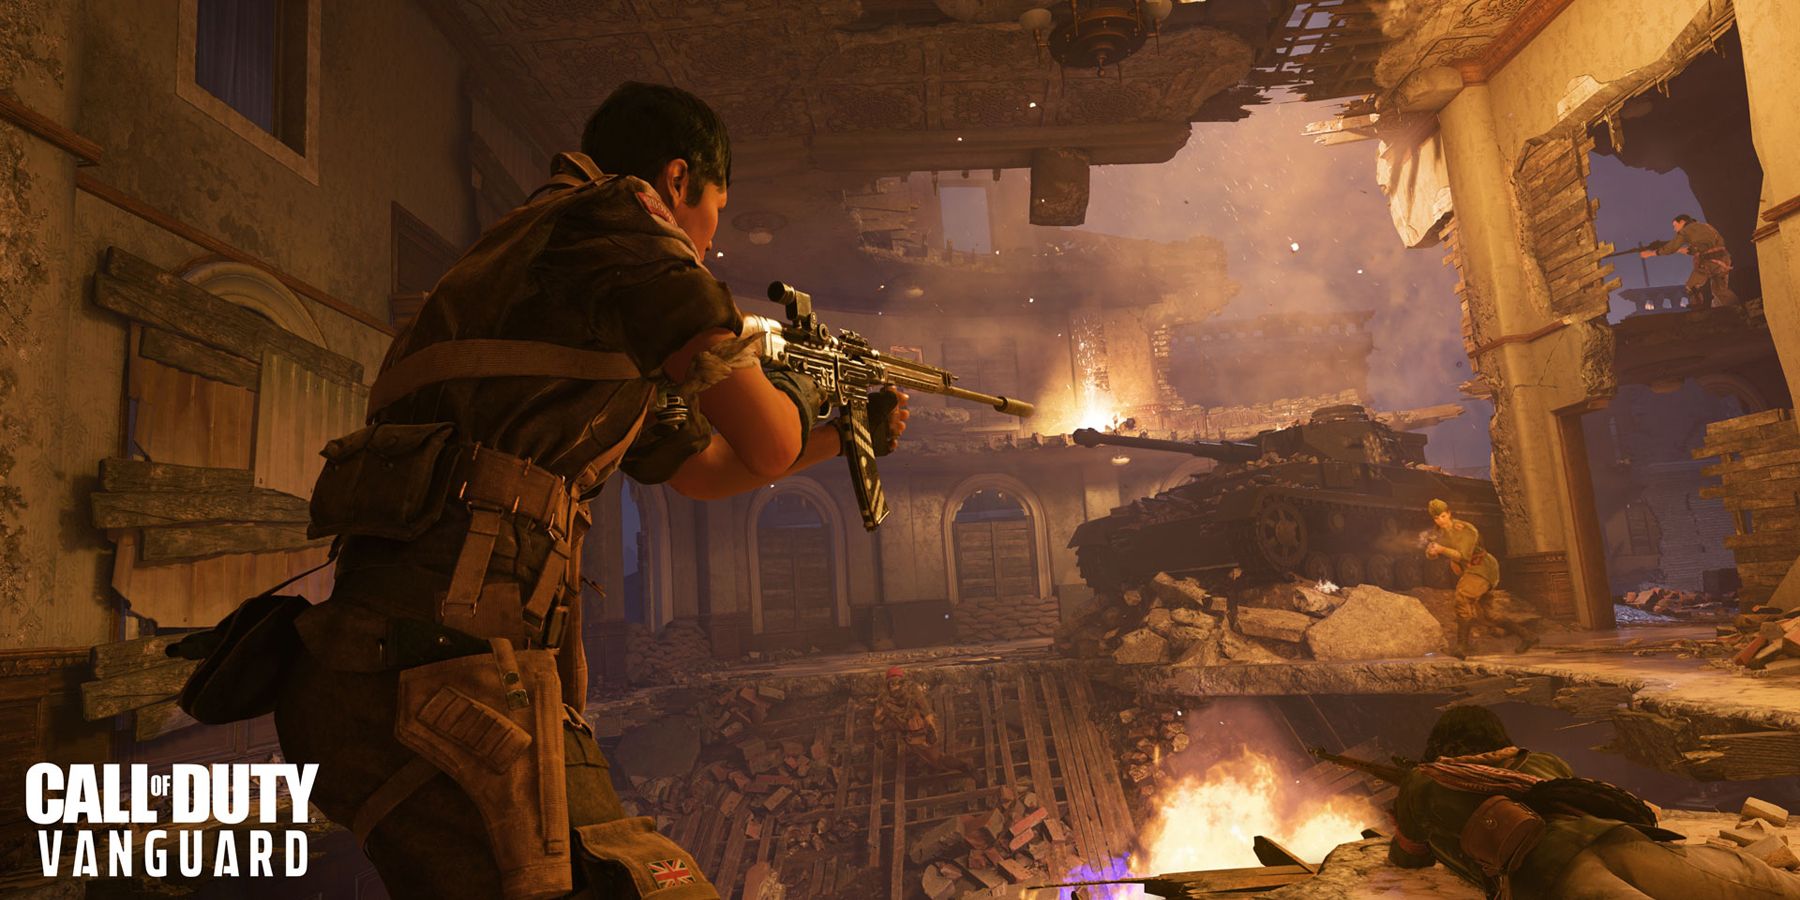 Call of Duty: Vanguard Is Being Plagued By Cheaters Ahead Of Full Ricochet Launch